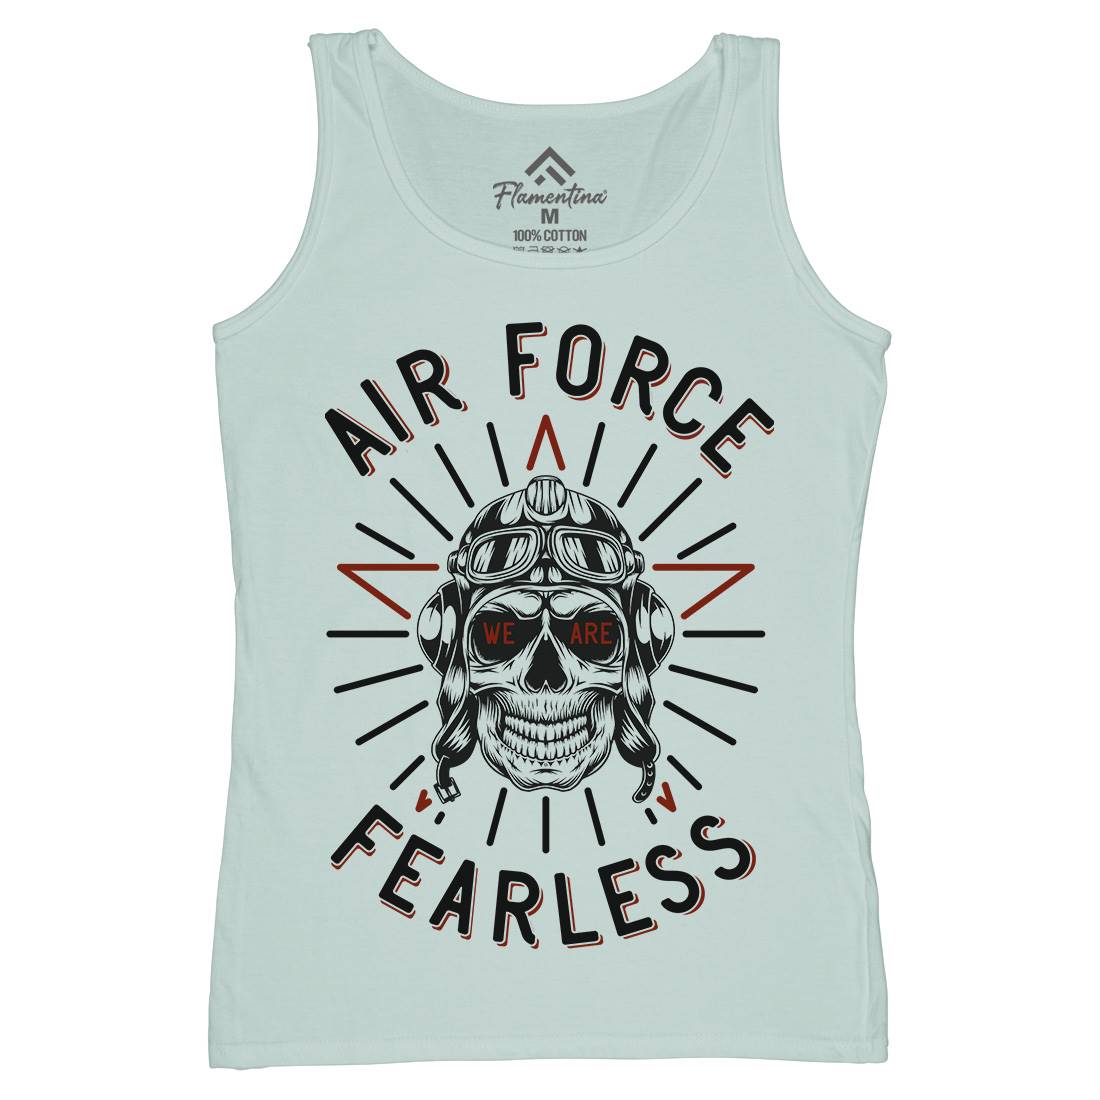 Air Force Fearless Womens Organic Tank Top Vest Army D900